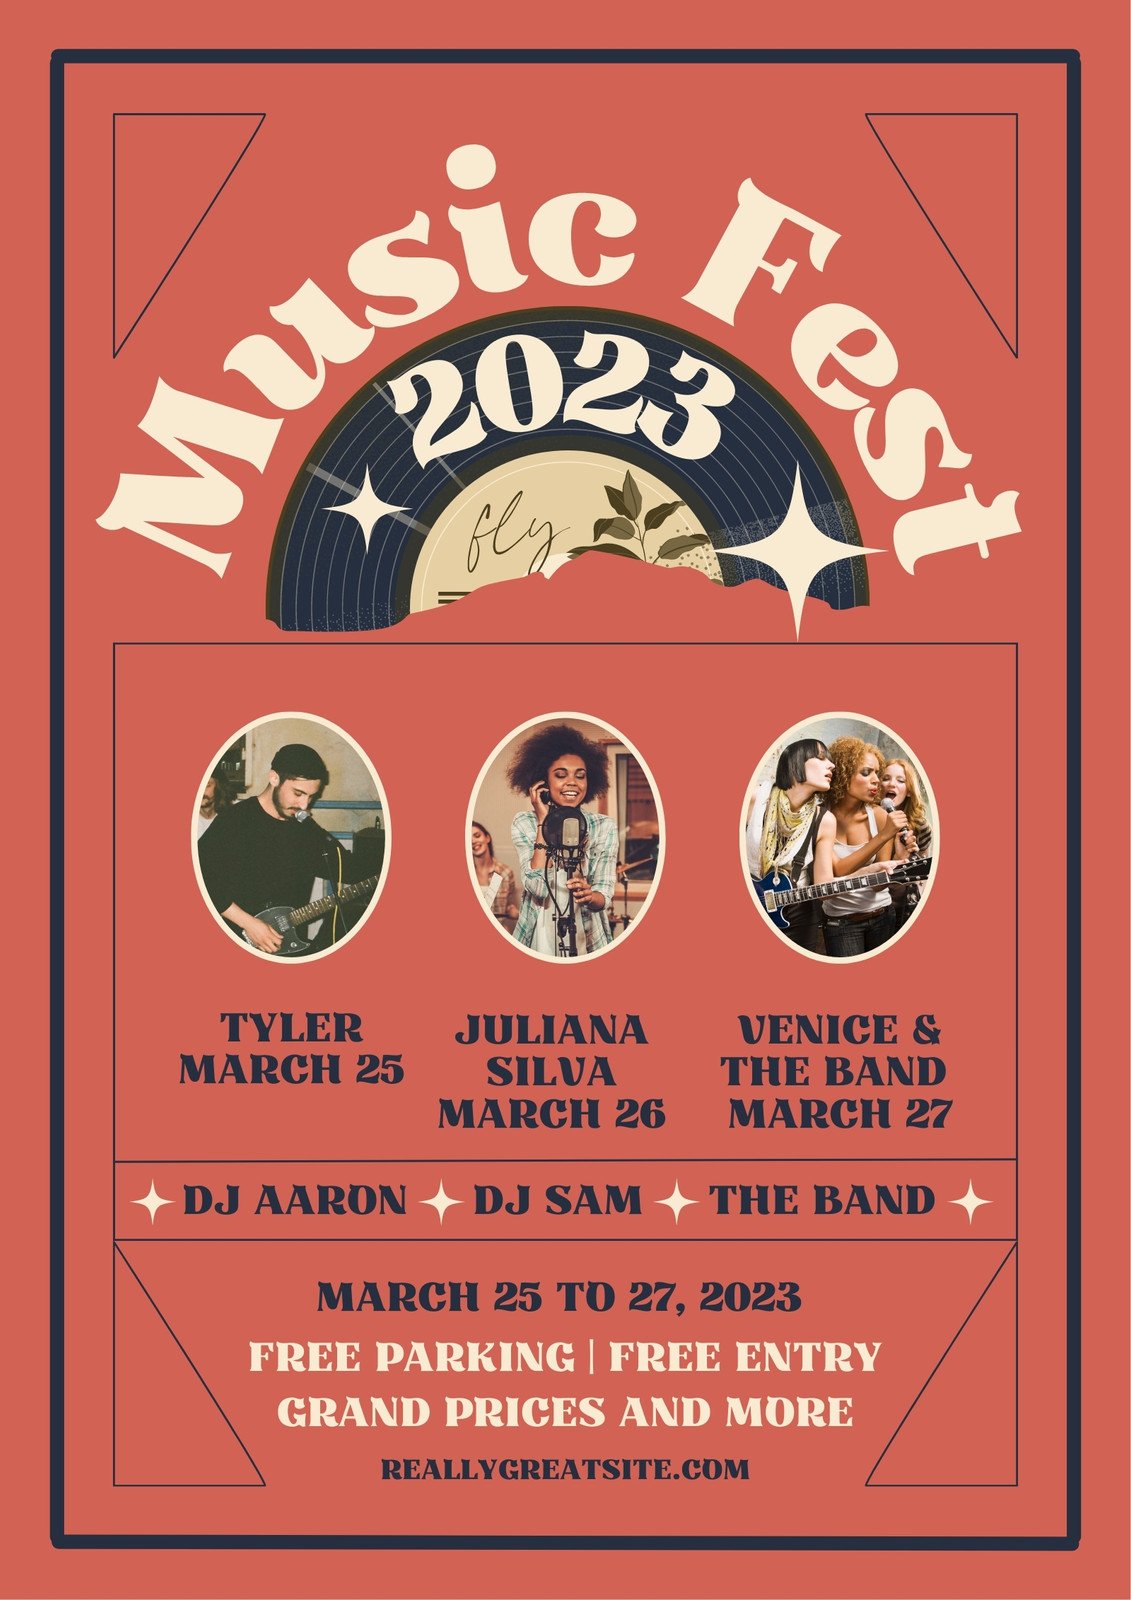 Retro Maroon Aesthetic Music and Concert Fest Event Calendar Poster